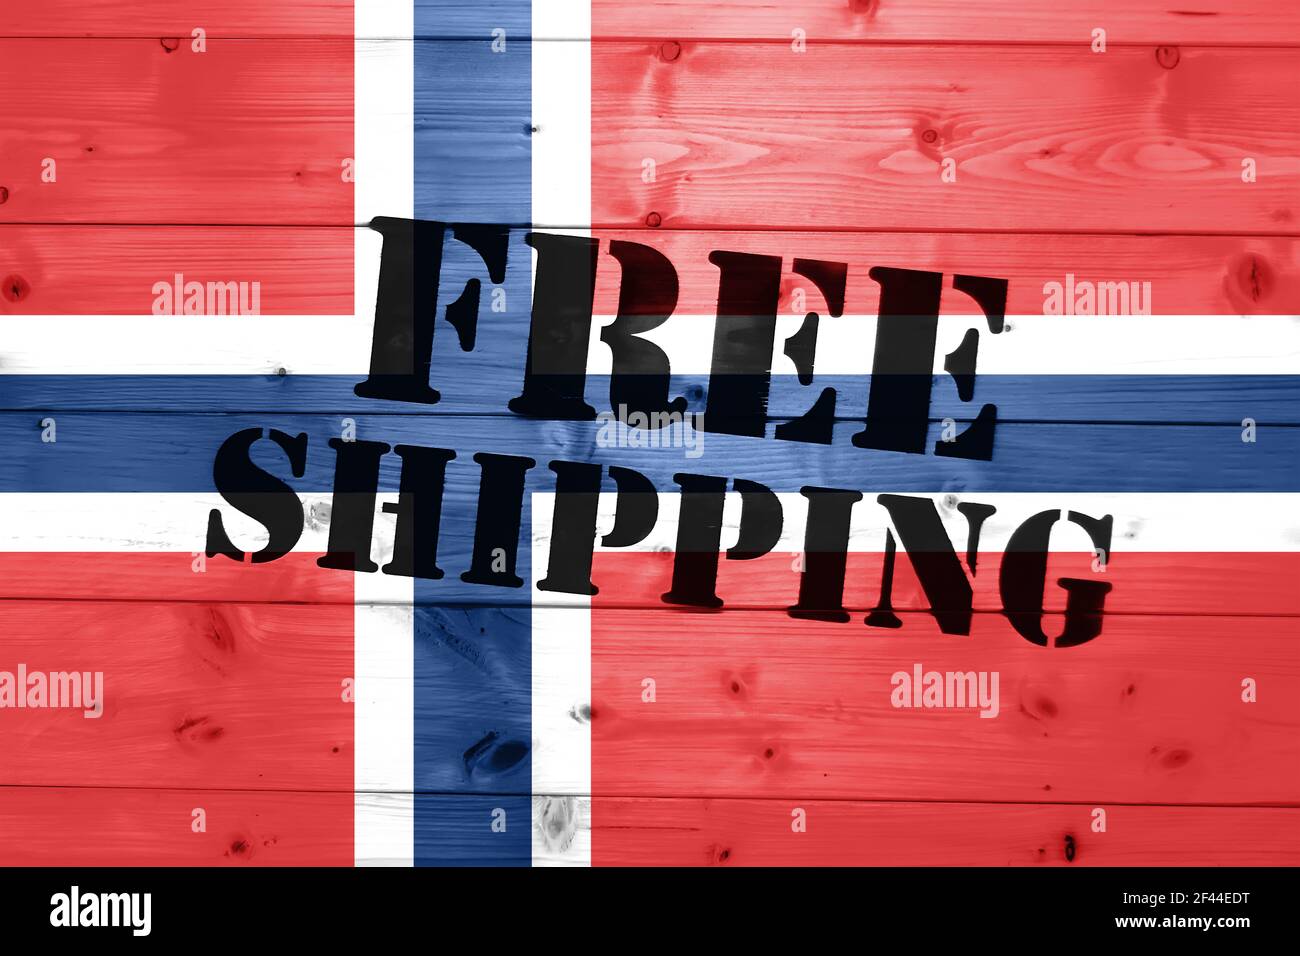 Norway Flag Free Shipping On Wooden Transport Box With Flag Logistics Concept Stock Photo Alamy